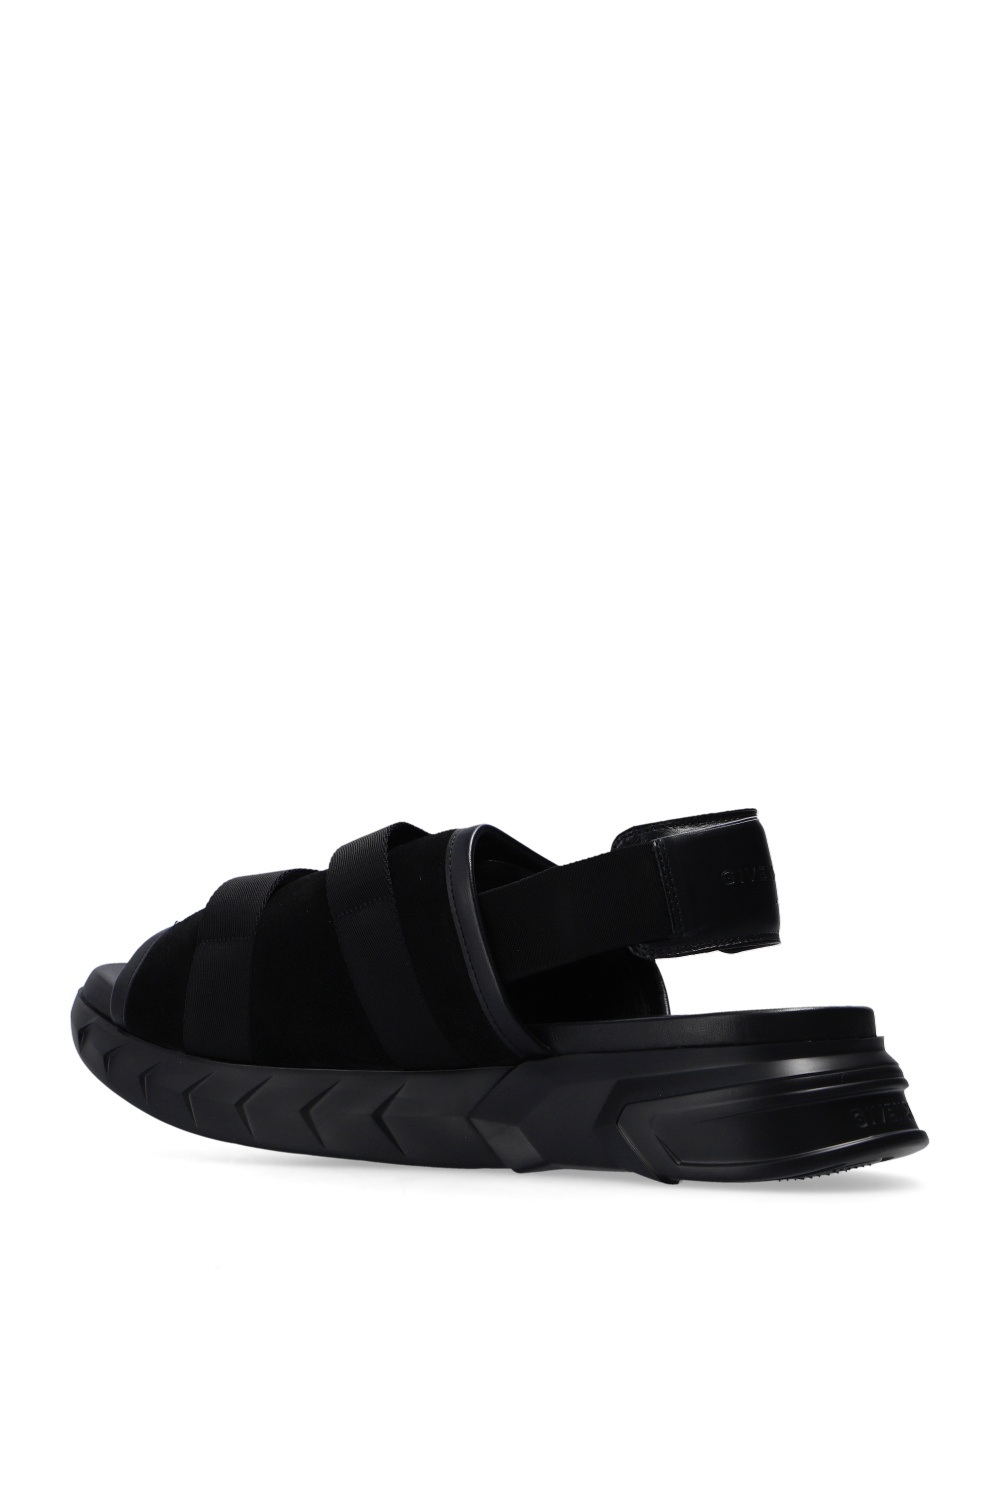 Givenchy ‘Marshmallow’ sandals